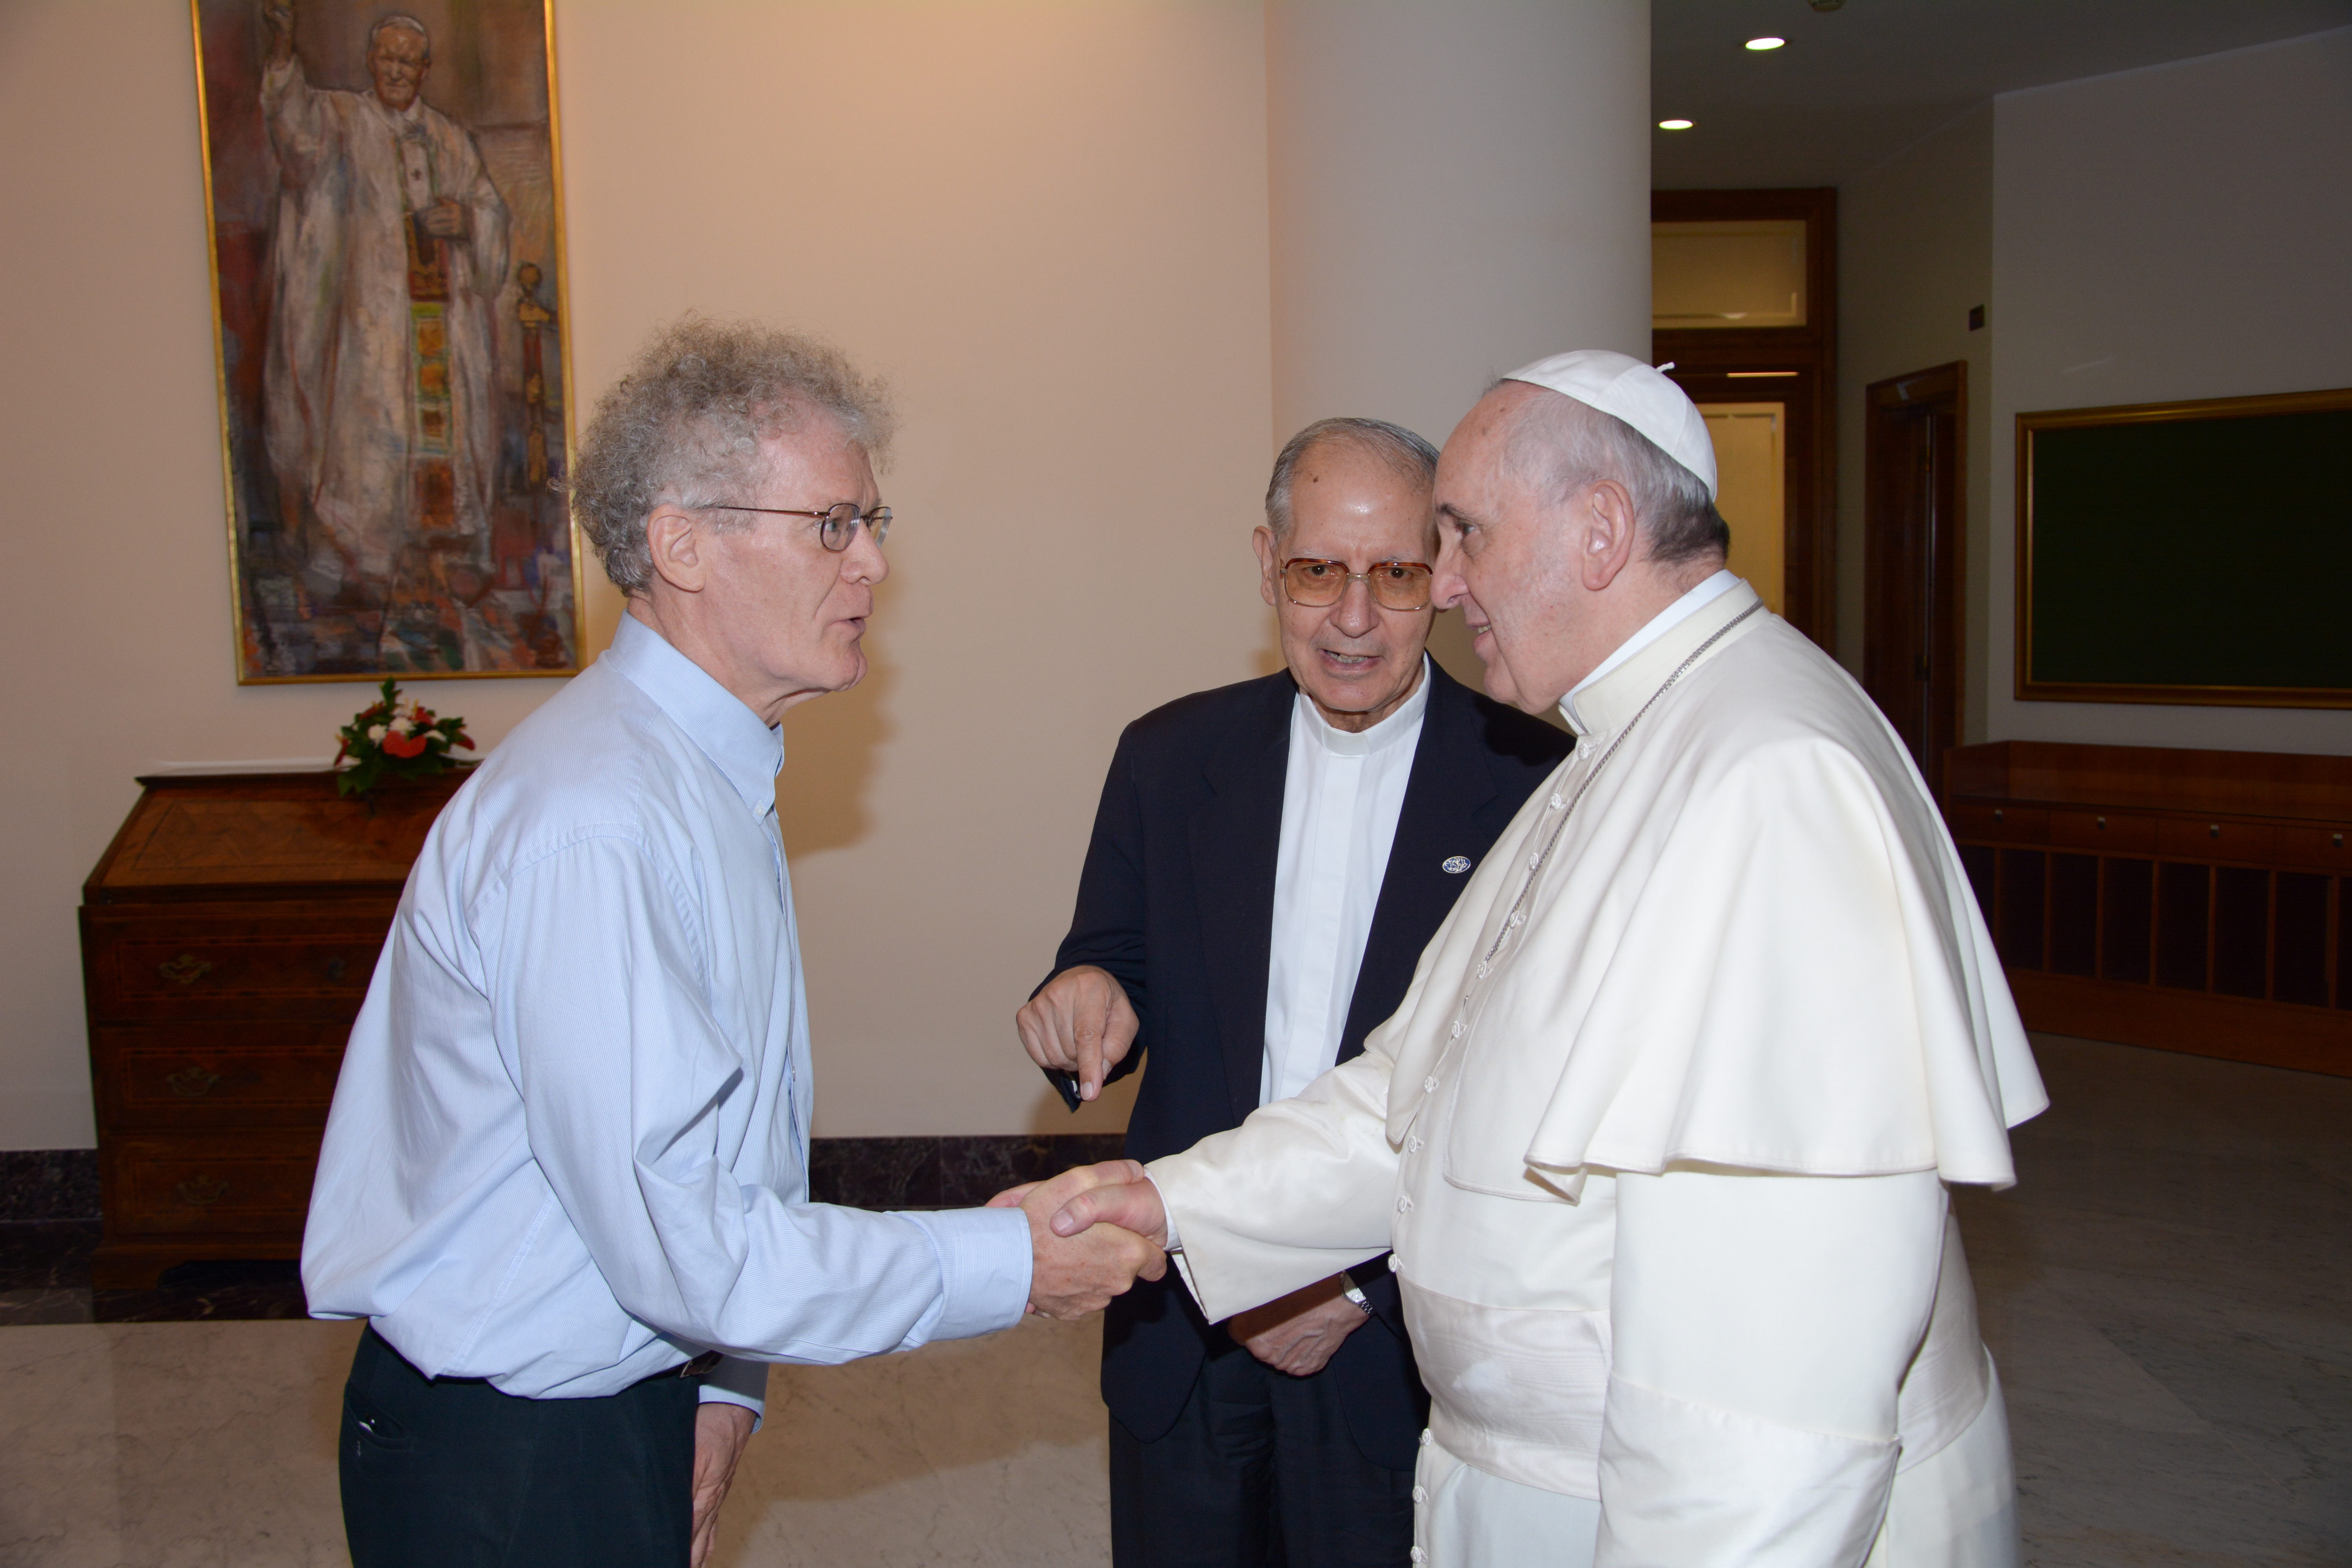 Ryan's uncle, Fr. Richard Baumann SJ (Left), meets with Pope Francis in Rome on August 7, 2014. Fr. Adolfo Nicolas SJ (Center) is the Superior General, Society of Jesus (SJ) worldwide. All are Jesuit priests.